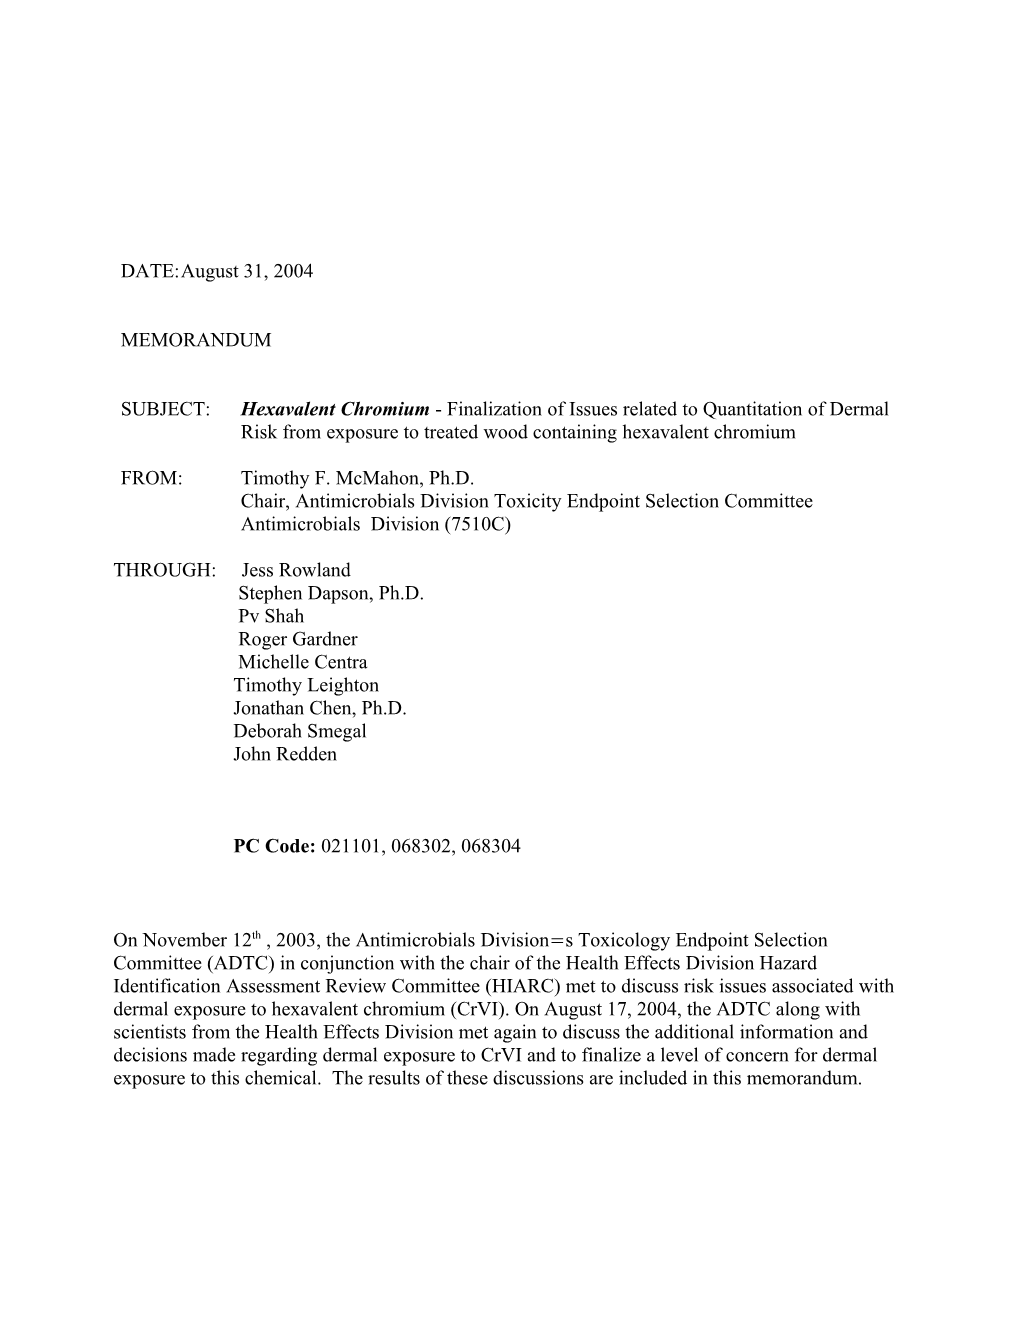 Chair, Antimicrobials Division Toxicity Endpoint Selection Committee